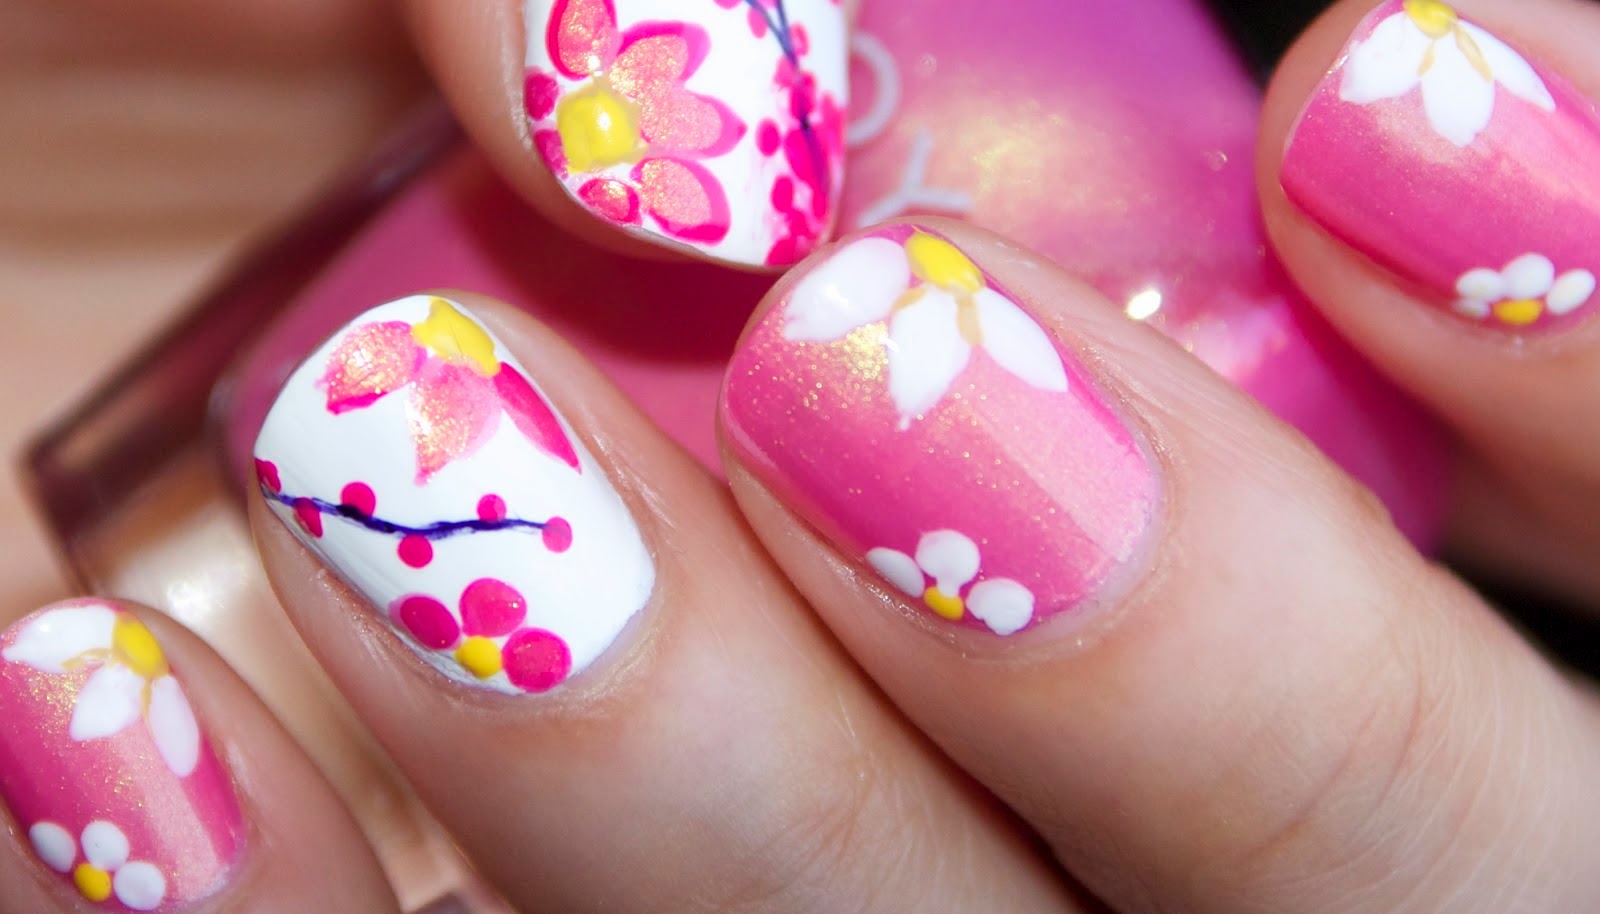 Flower Nail Art Tutorial for Beginners using Toothpick - wide 4